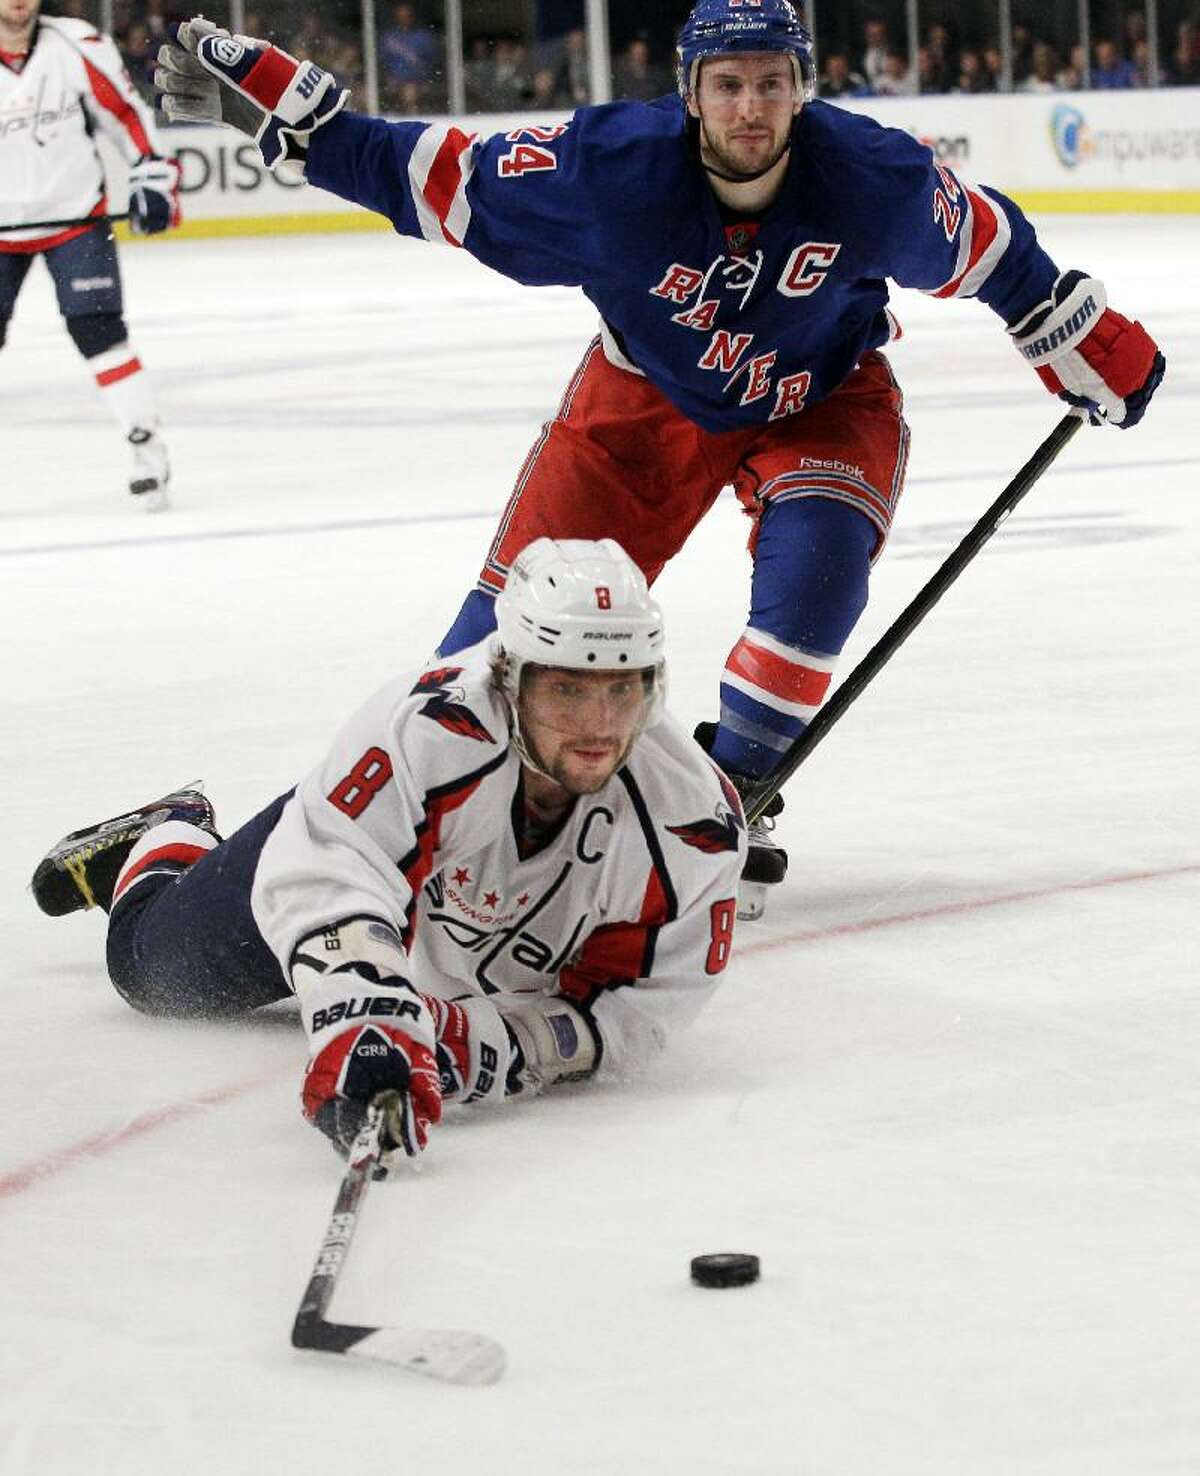 ASSOCIATED PRESS Washington Capitals' Alex Ovechkin (8) falls to the ice while fighting for control of the puck with New York Rangers' Ryan Callahan (24) during the third period of Game 1 of an NHL Stanley Cup playoff series Saturday in New York. The Rangers won the game 3-1.